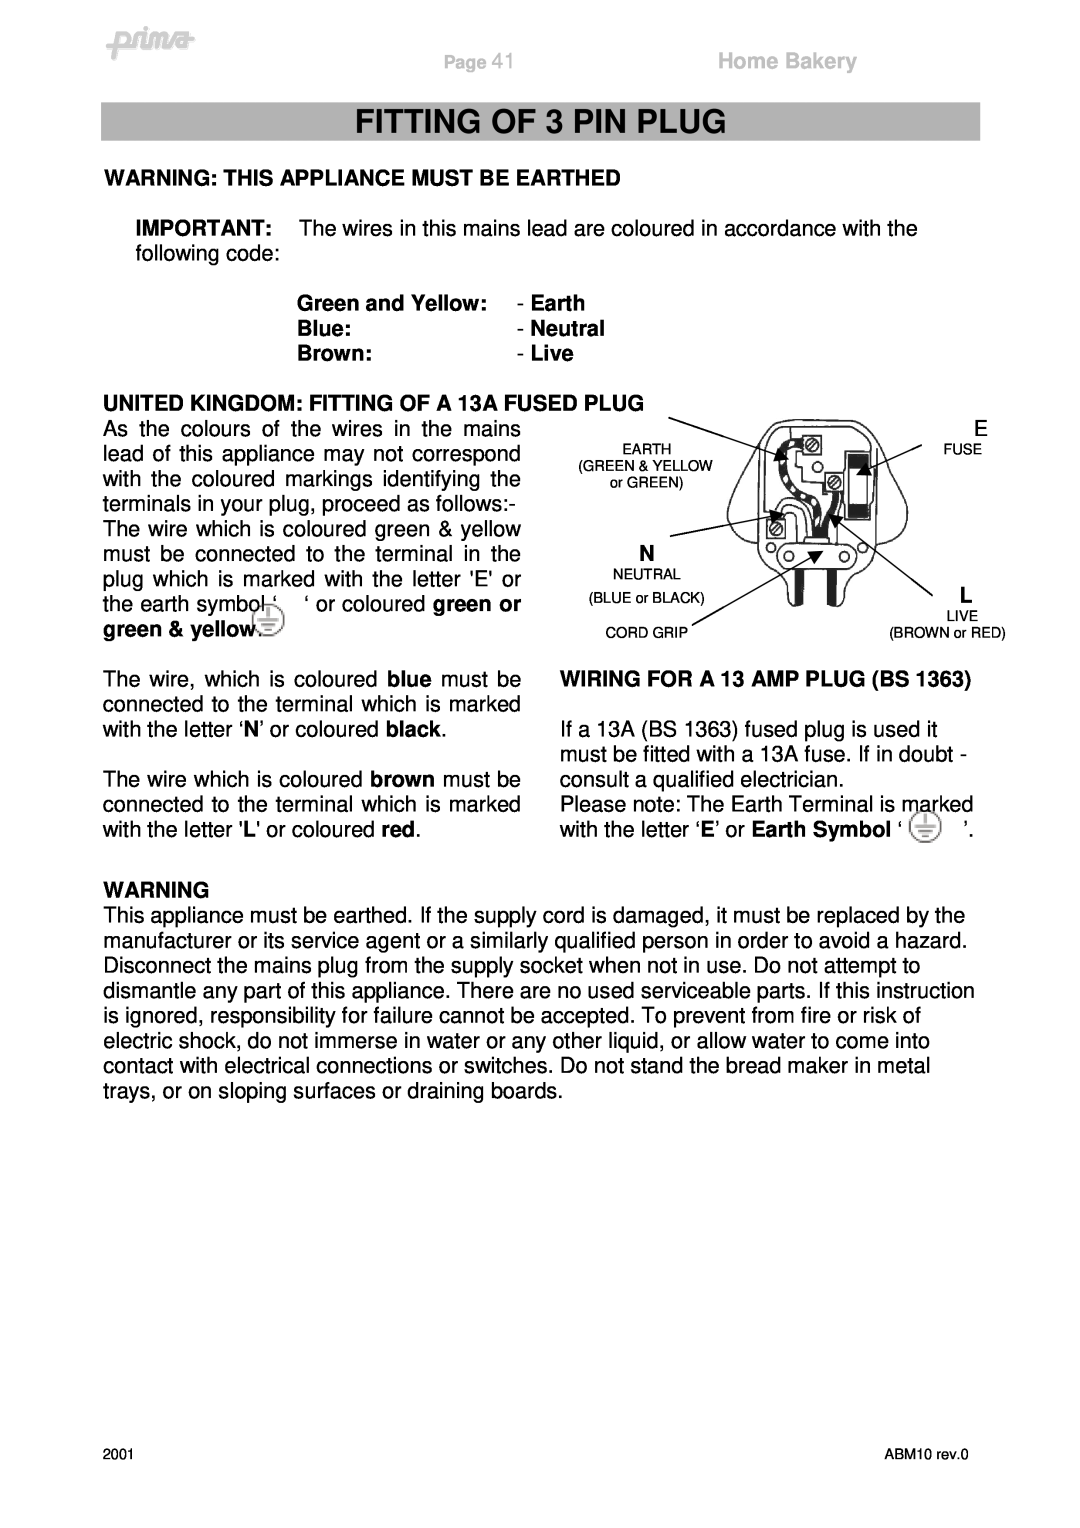 Prima ABM10 instruction manual FITTING OF 3 PIN PLUG, Home Bakery, Warning This Appliance Must Be Earthed, Brown - Live 